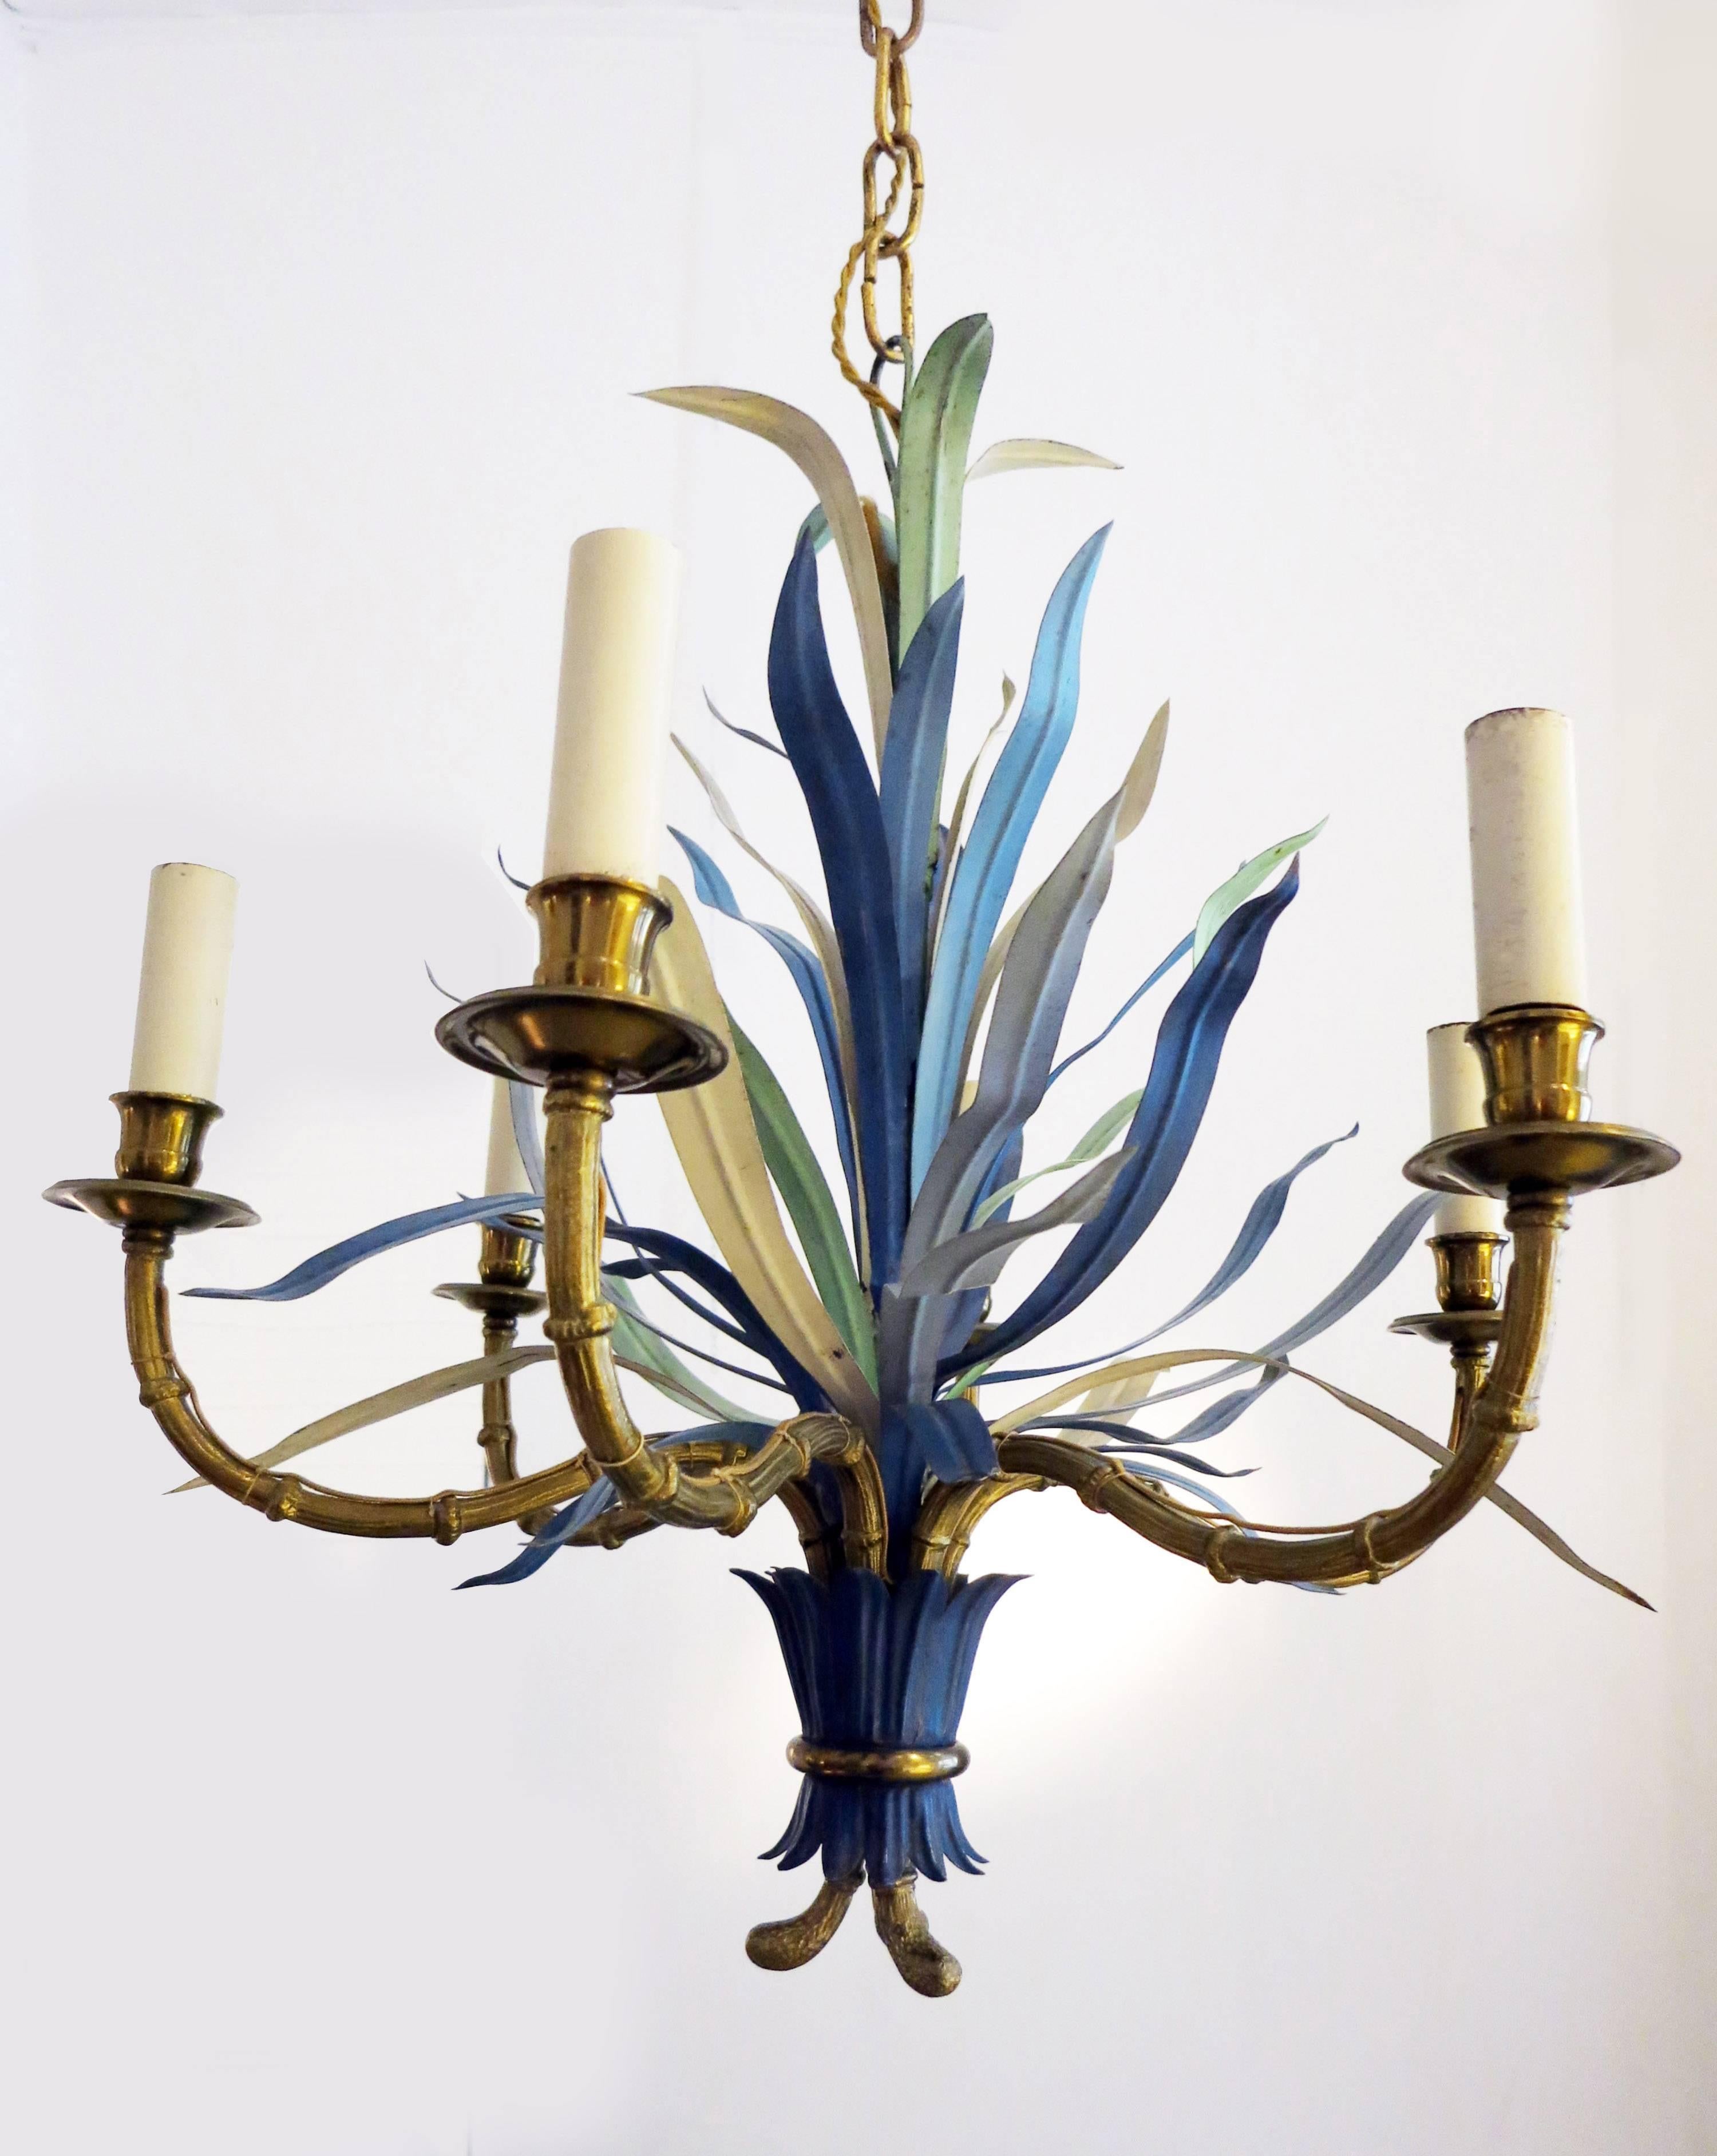 Rare colored blue and green Maison Baguès chandelier.
Gilt bronze as bamboo and painted steel leaves.